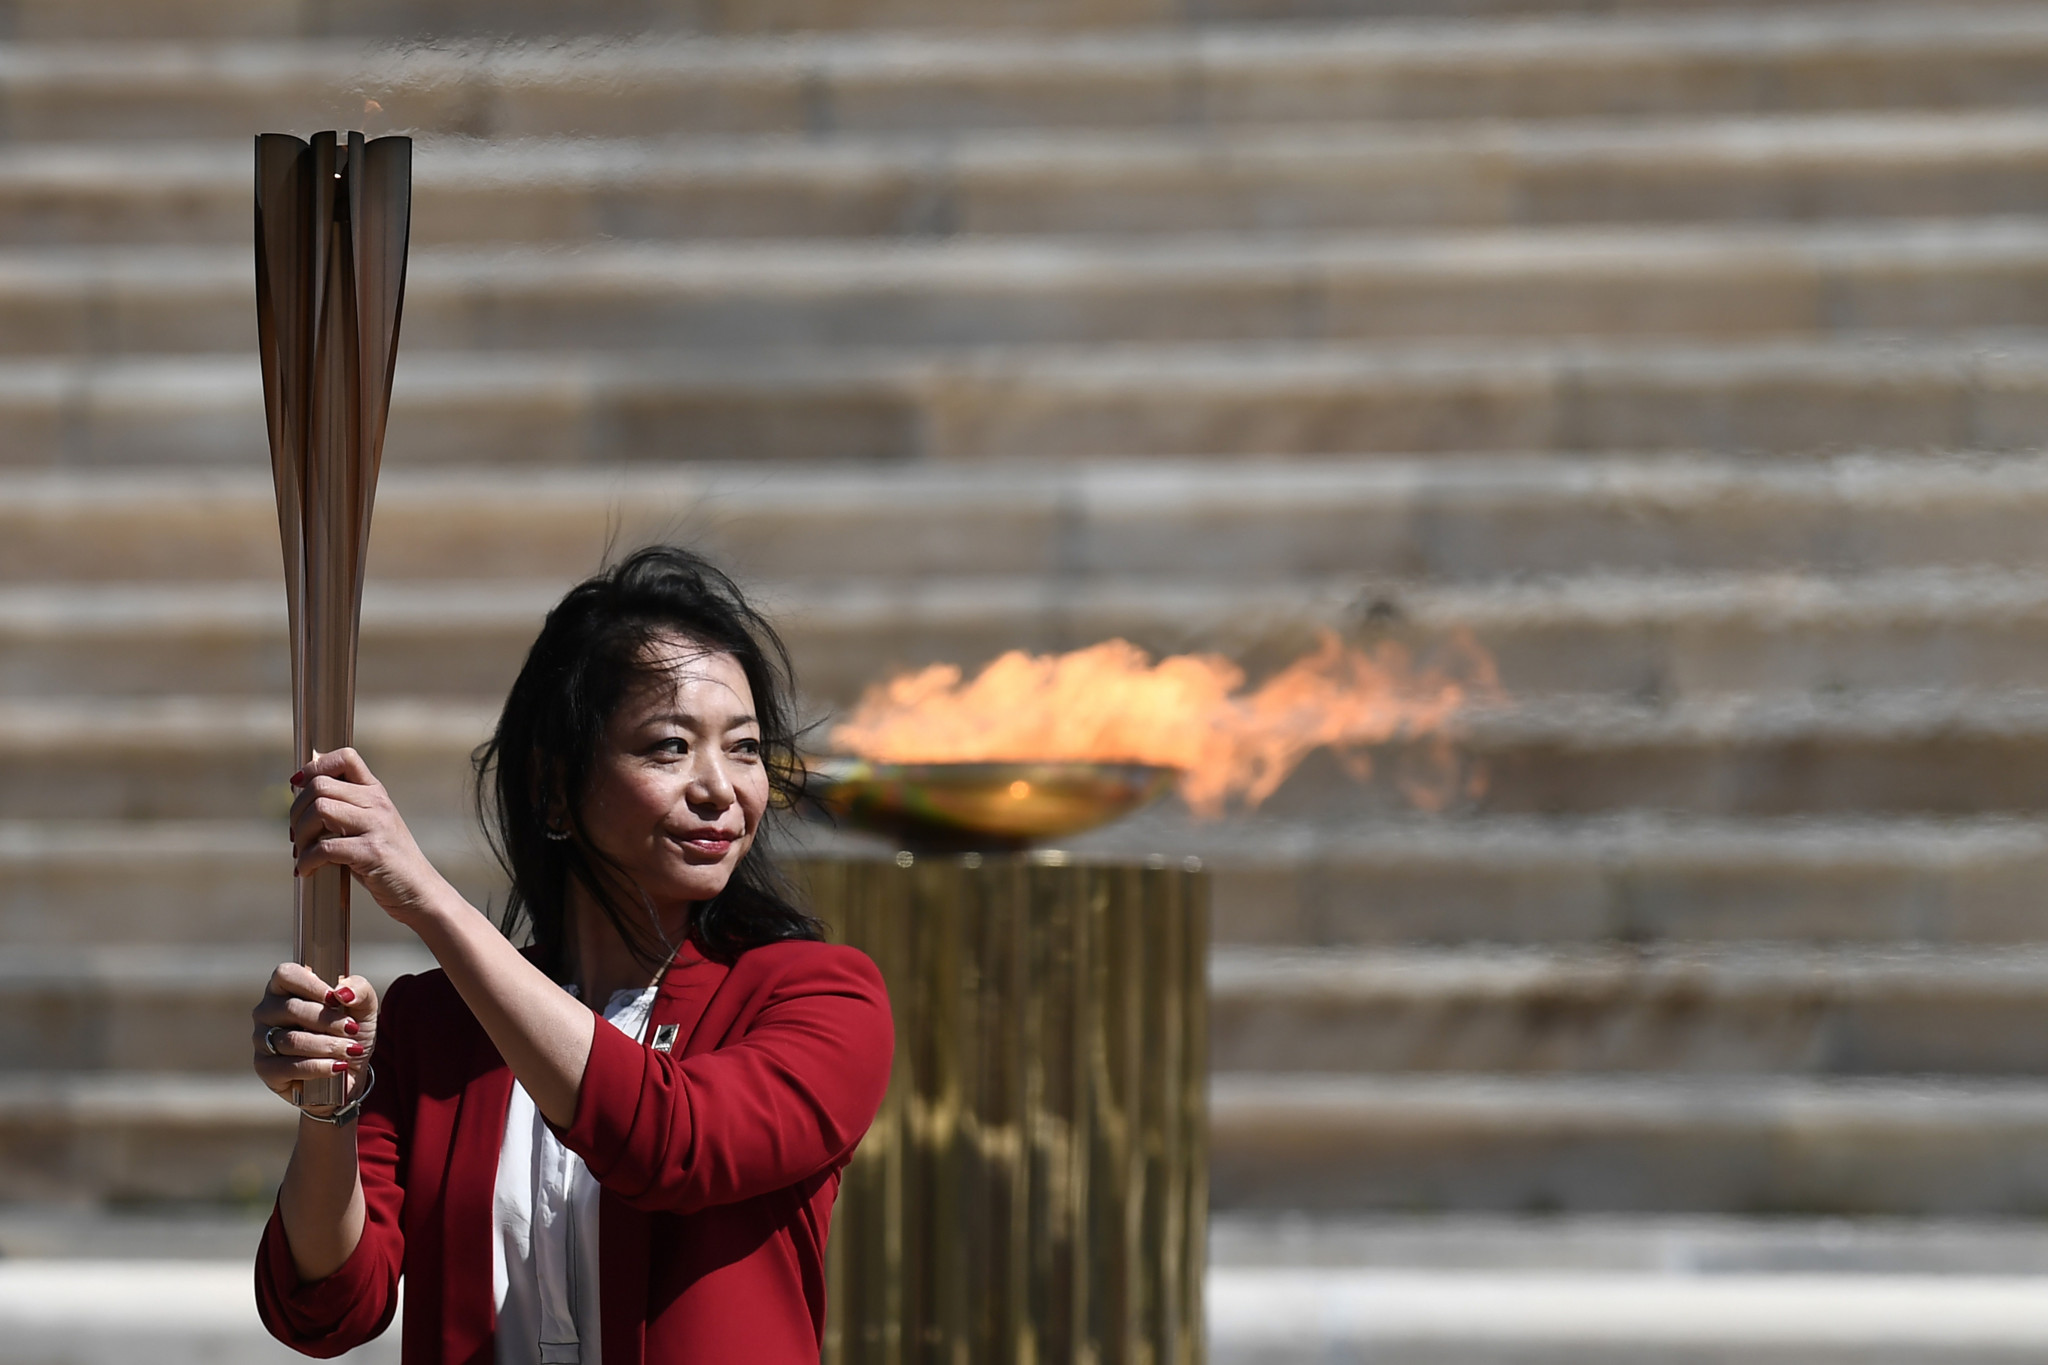 Naoko Imoto received the Olympic Flame on Tokyo 2020's behalf ©Getty Images